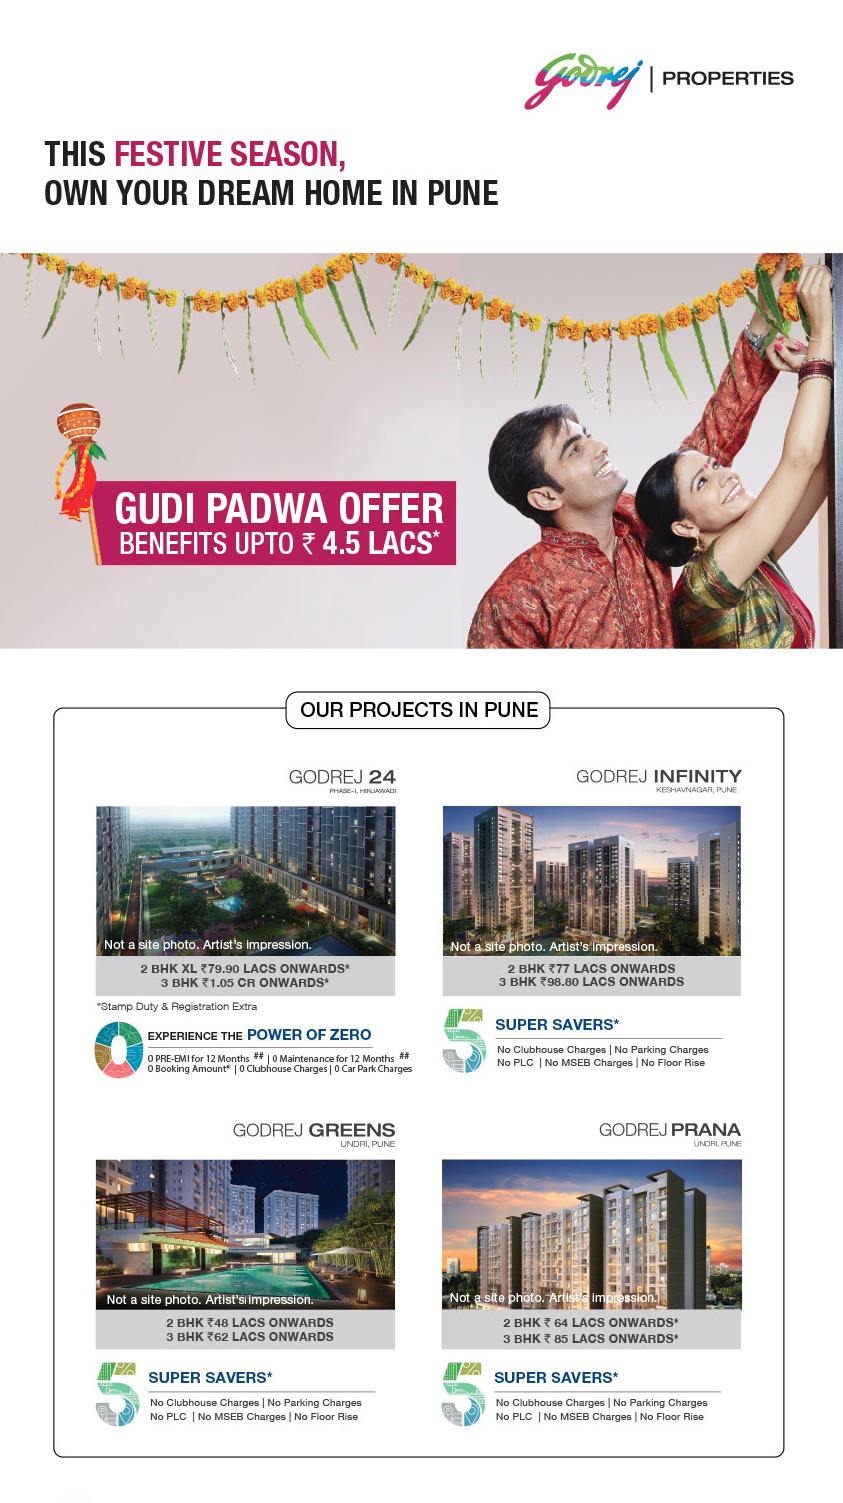 Gudi Padwa Offer with benefits up to Rs. 4.5 lacs at Godrej properties in Pune Update